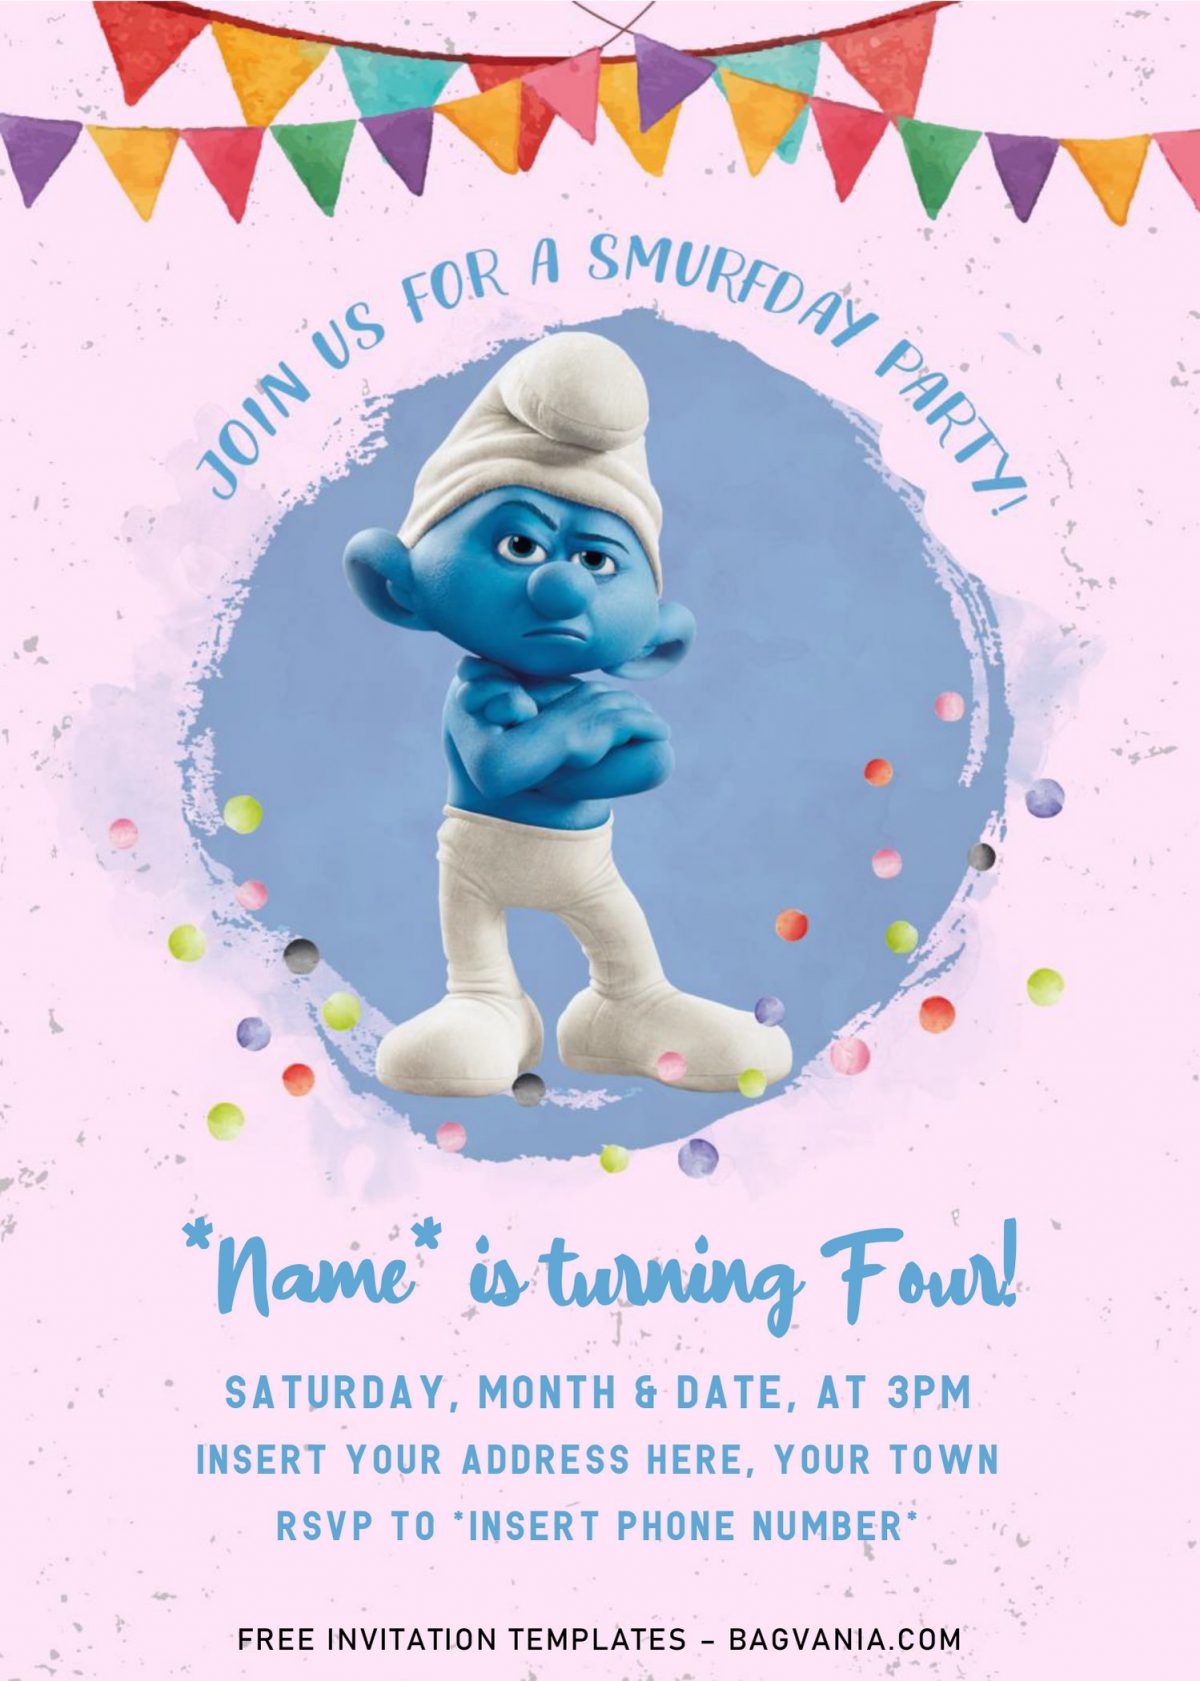 Free Smurf Birthday Invitation Templates For Free and has Colorful Bunting flags